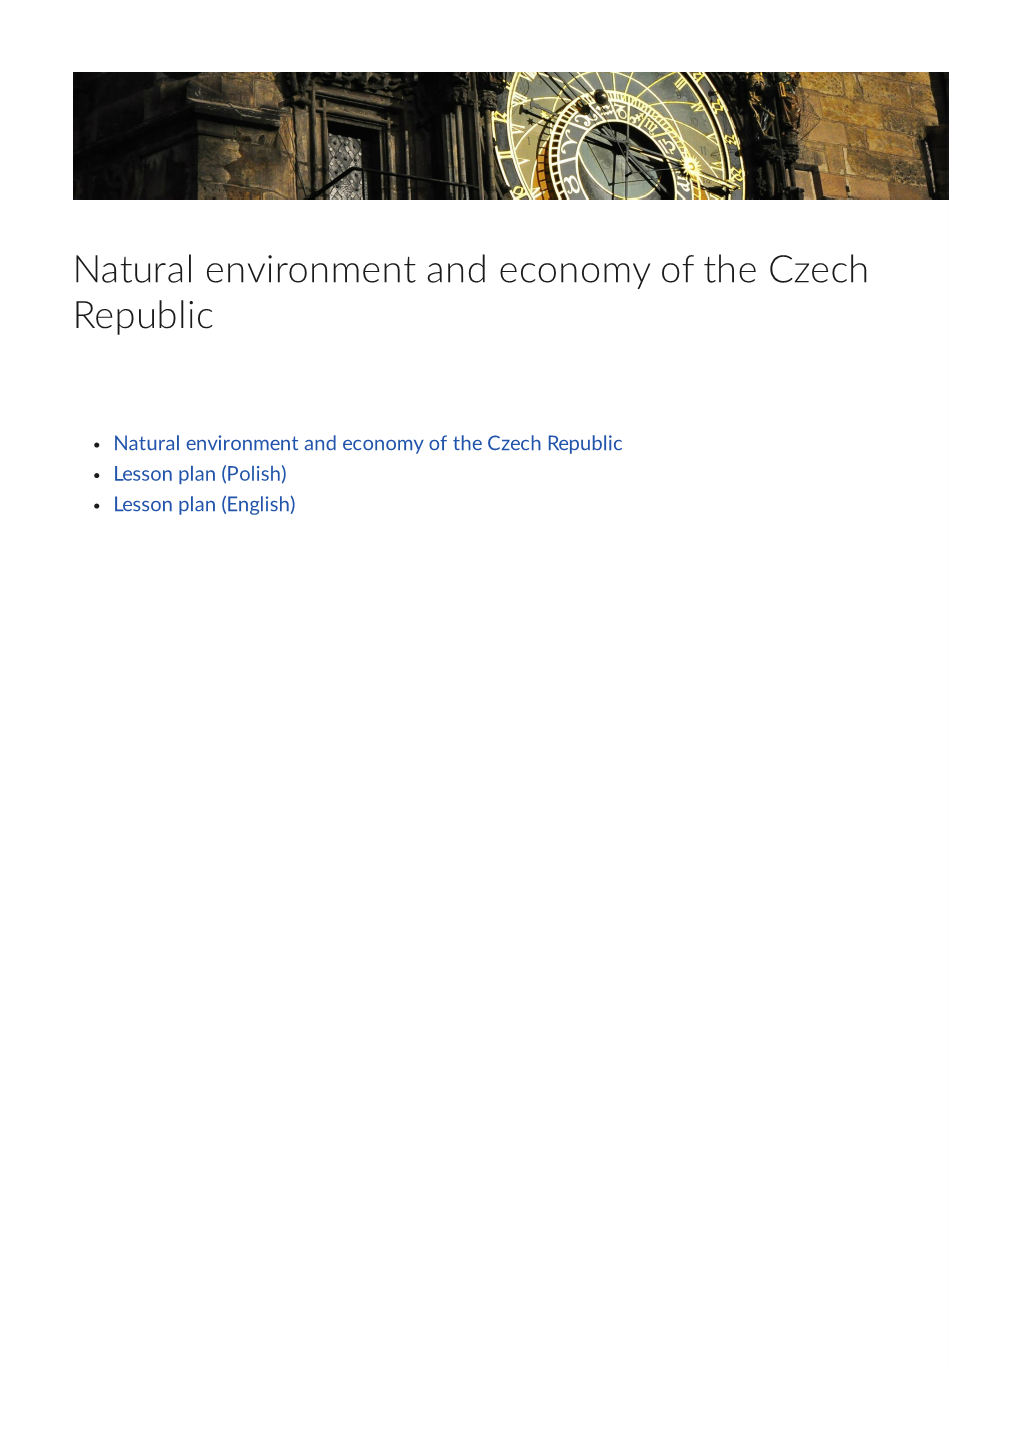 Natural Environment and Economy of the Czech Republic